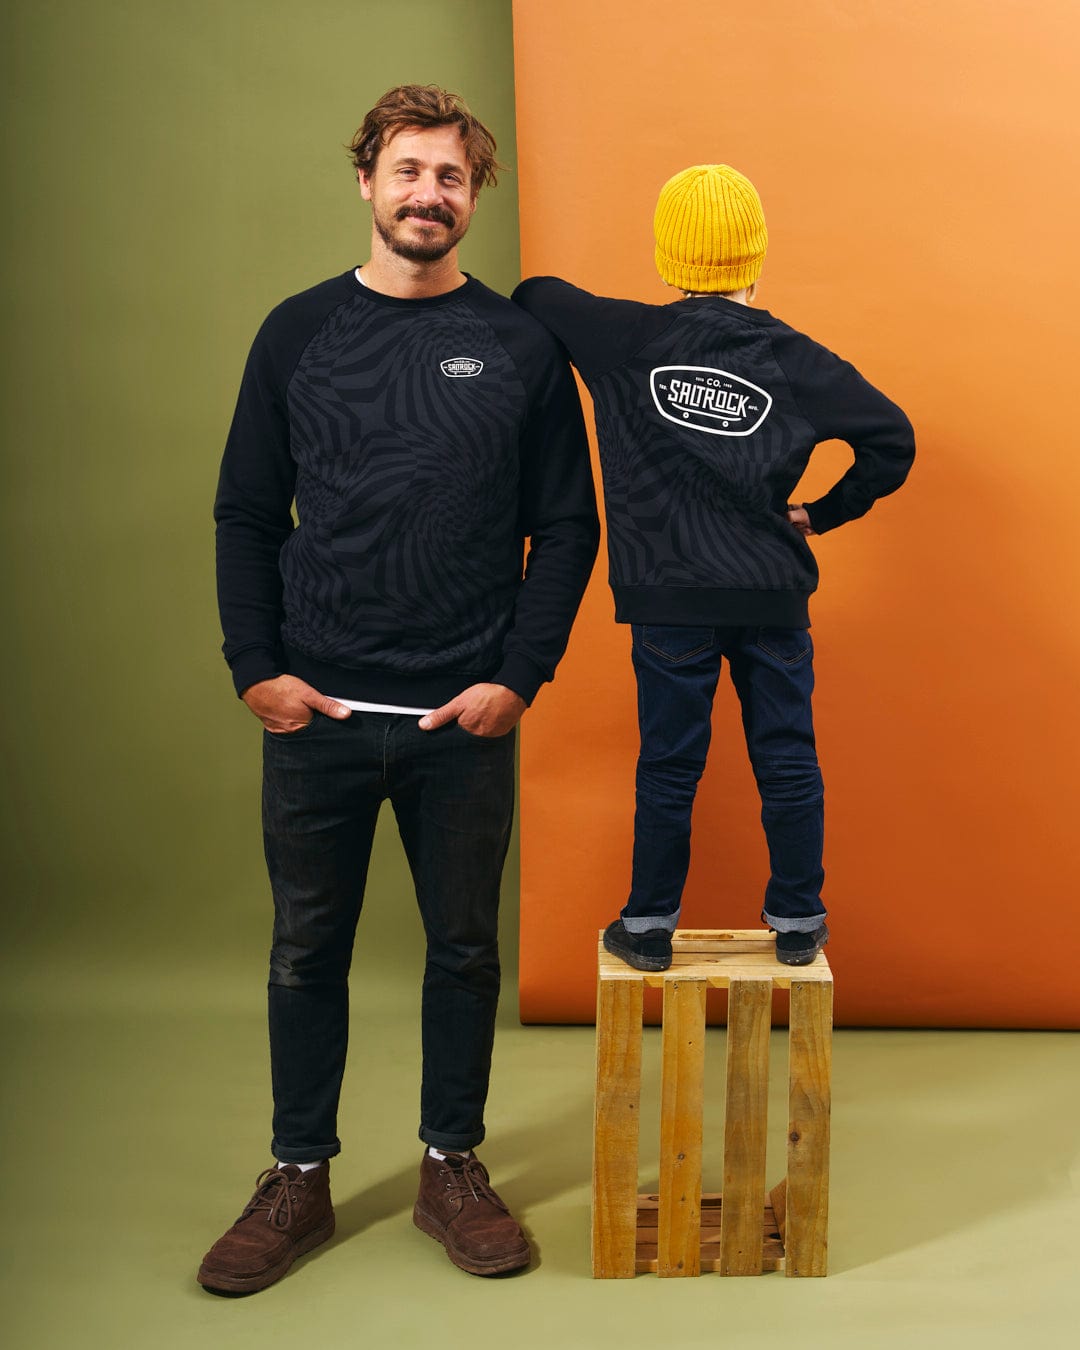 A man and child confidently posing next to each other in matching black sweatshirts featuring the captivating geometric print from Saltrock branding. Their hands firmly hold onto their skateboards displaying the Saltrock Grip It - Mens Crew Neck Sweat - Black.